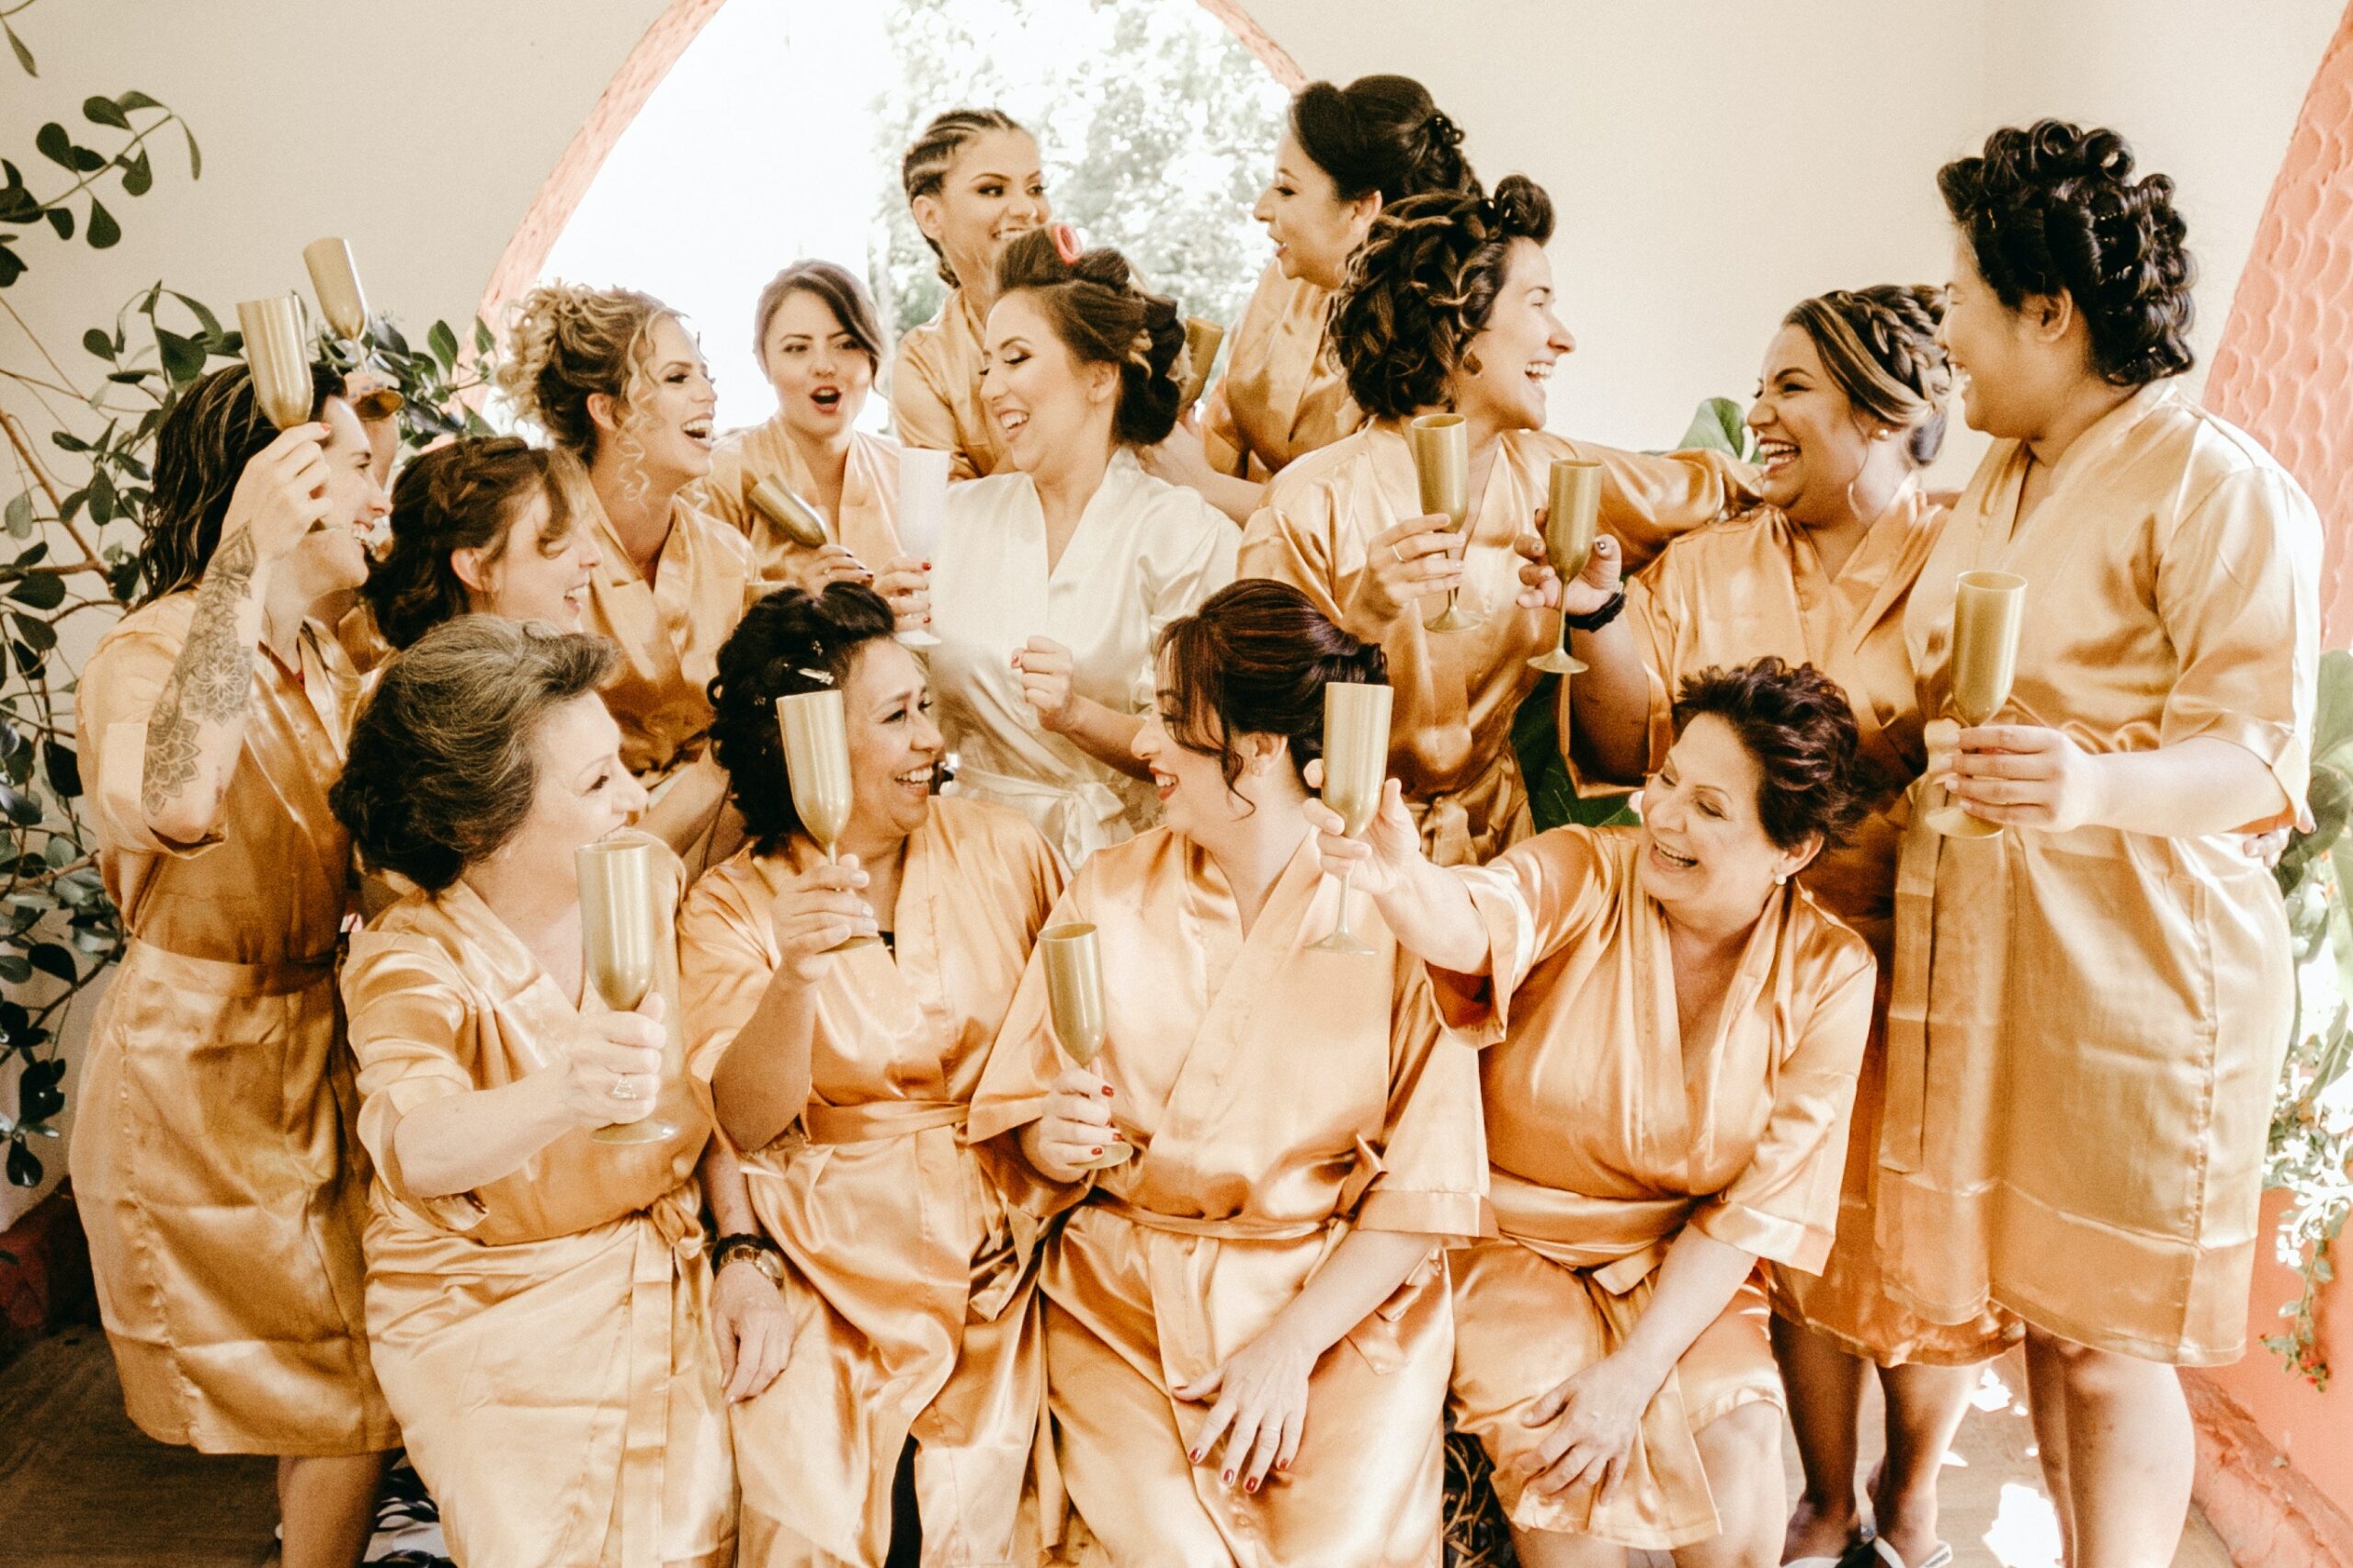 Guide to Planning the Perfect Photoshoot with your #BrideSquad